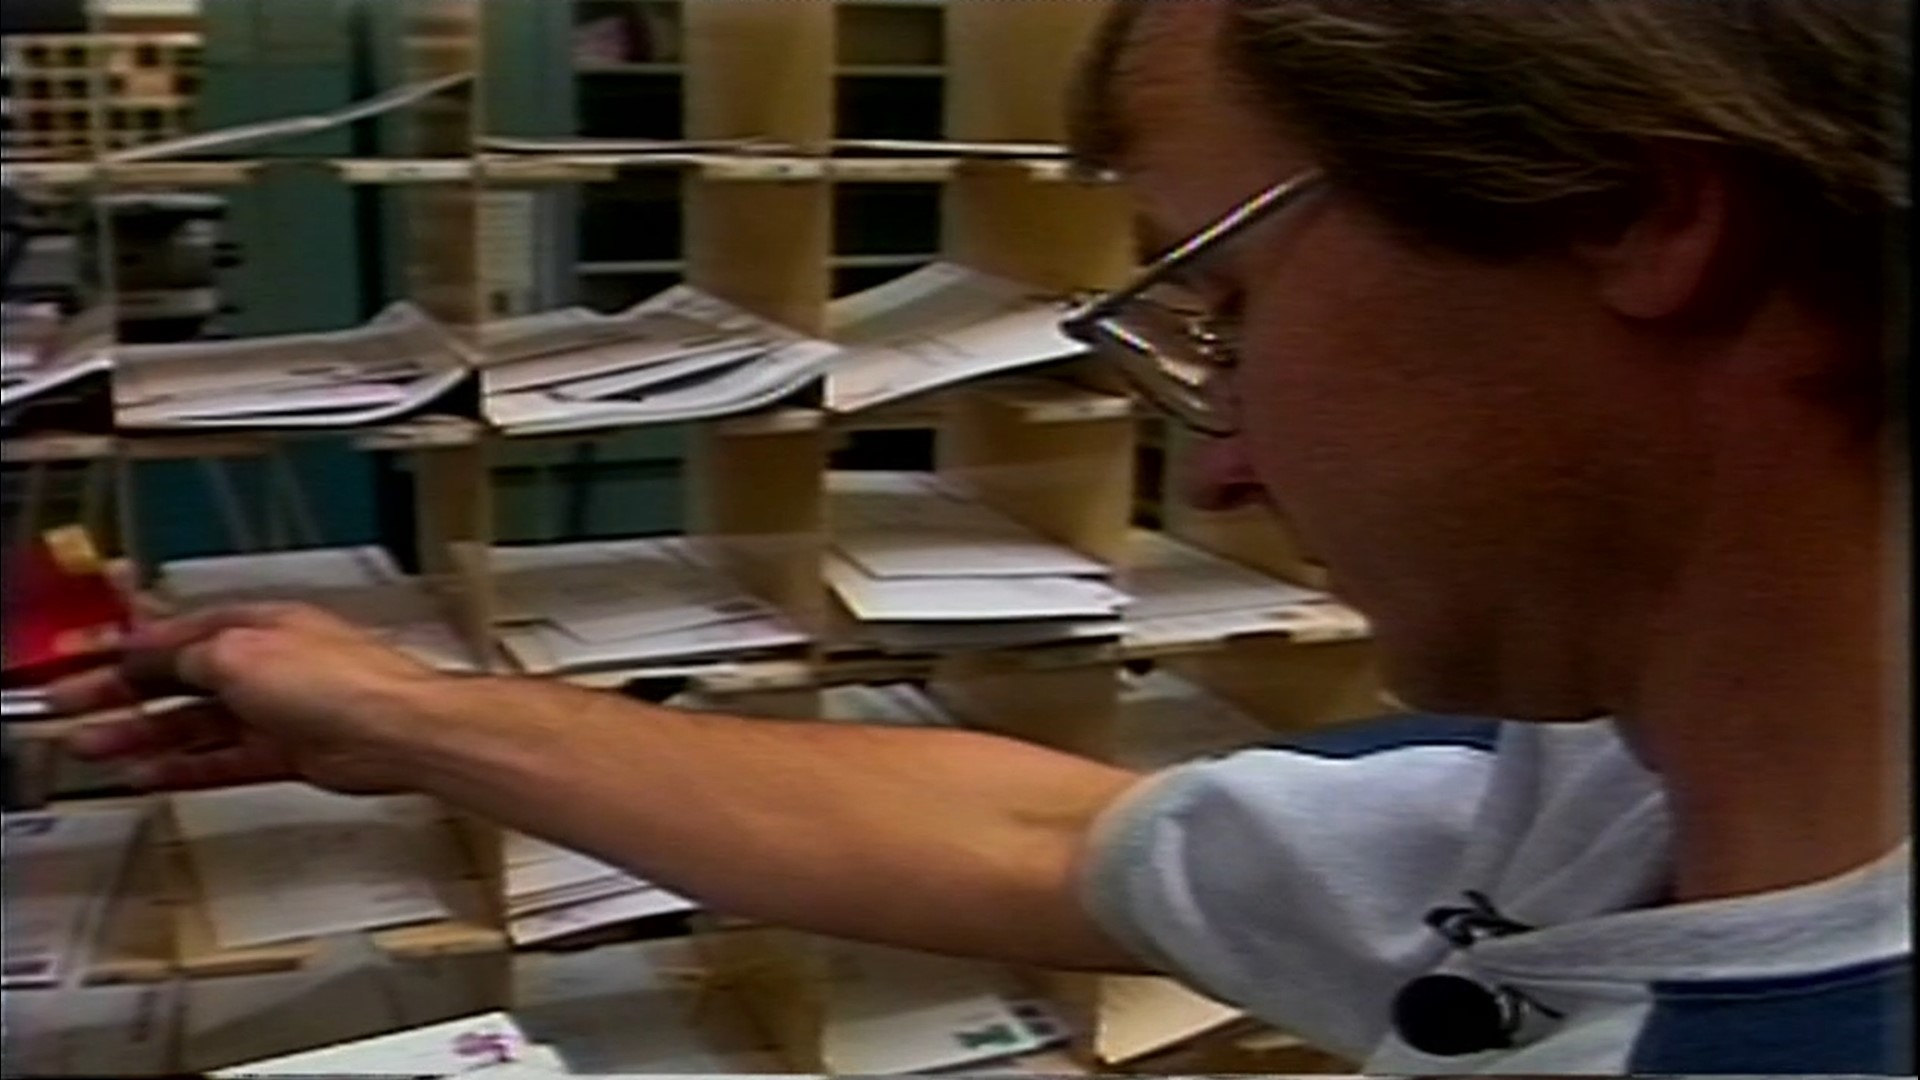 In 1995, there were some 20,000 addresses and 45 mail routes in Moline. Distribution clerks had to memorize all routes and manually sort each letter daily.